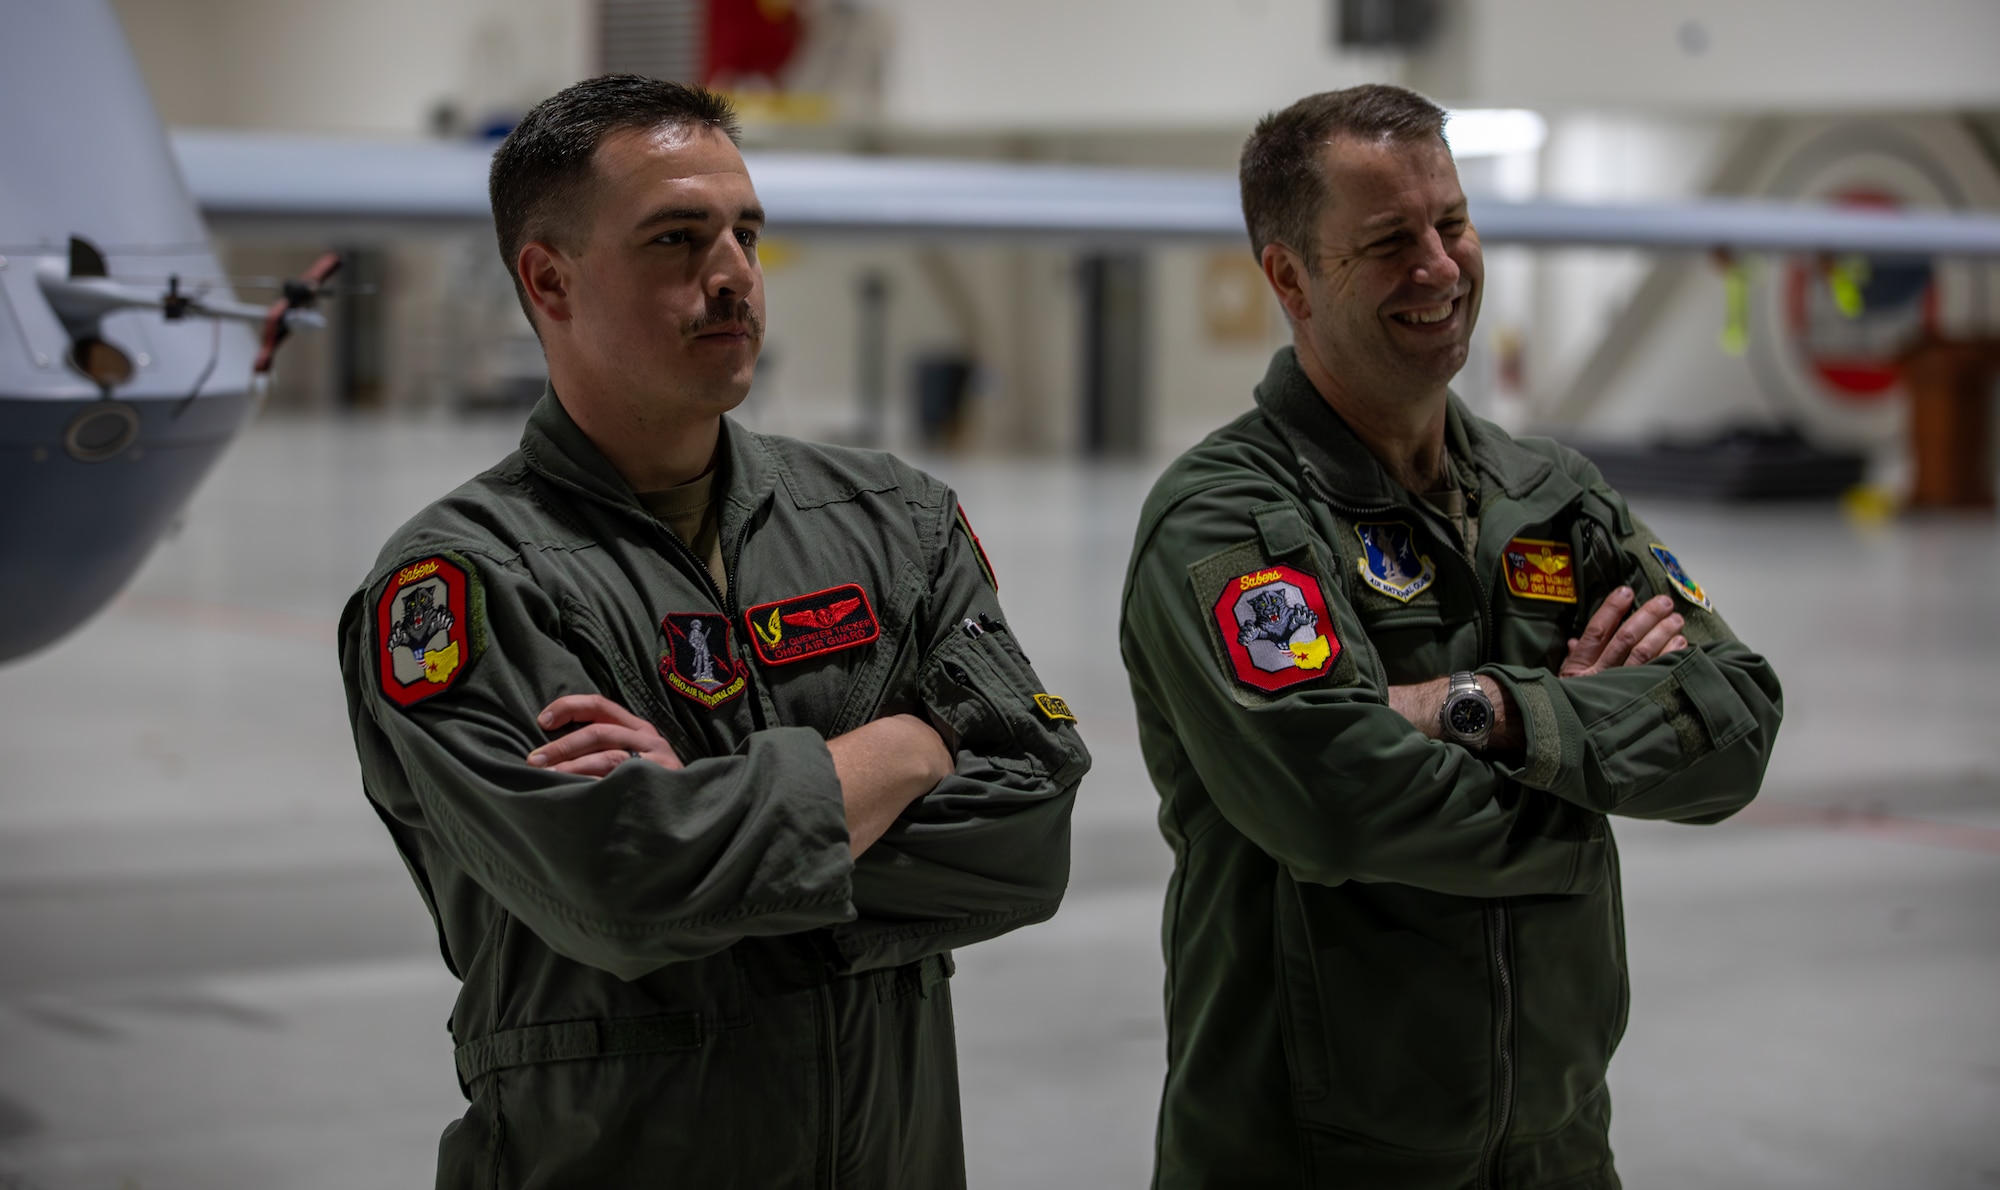 Col. Andy Kazmaier, right, 178th Wing commander, and Tech. Sgt. Quenten Tucker, left, an MQ-9 sensor operator assigned to the 178th Wing, stand for a photograph following the landing of a MQ-9 Reaper on Springfield-Beckley Air National Guard Base, Ohio, March 12, 2024. The historic landing marks the beginning of exercise Advanced Wrath, demonstrating the operational capabilities of the Ohio National Guard to the greater U.S. Air Force. (U.S. Army National Guard photo by Staff Sgt. Thomas Moeger)